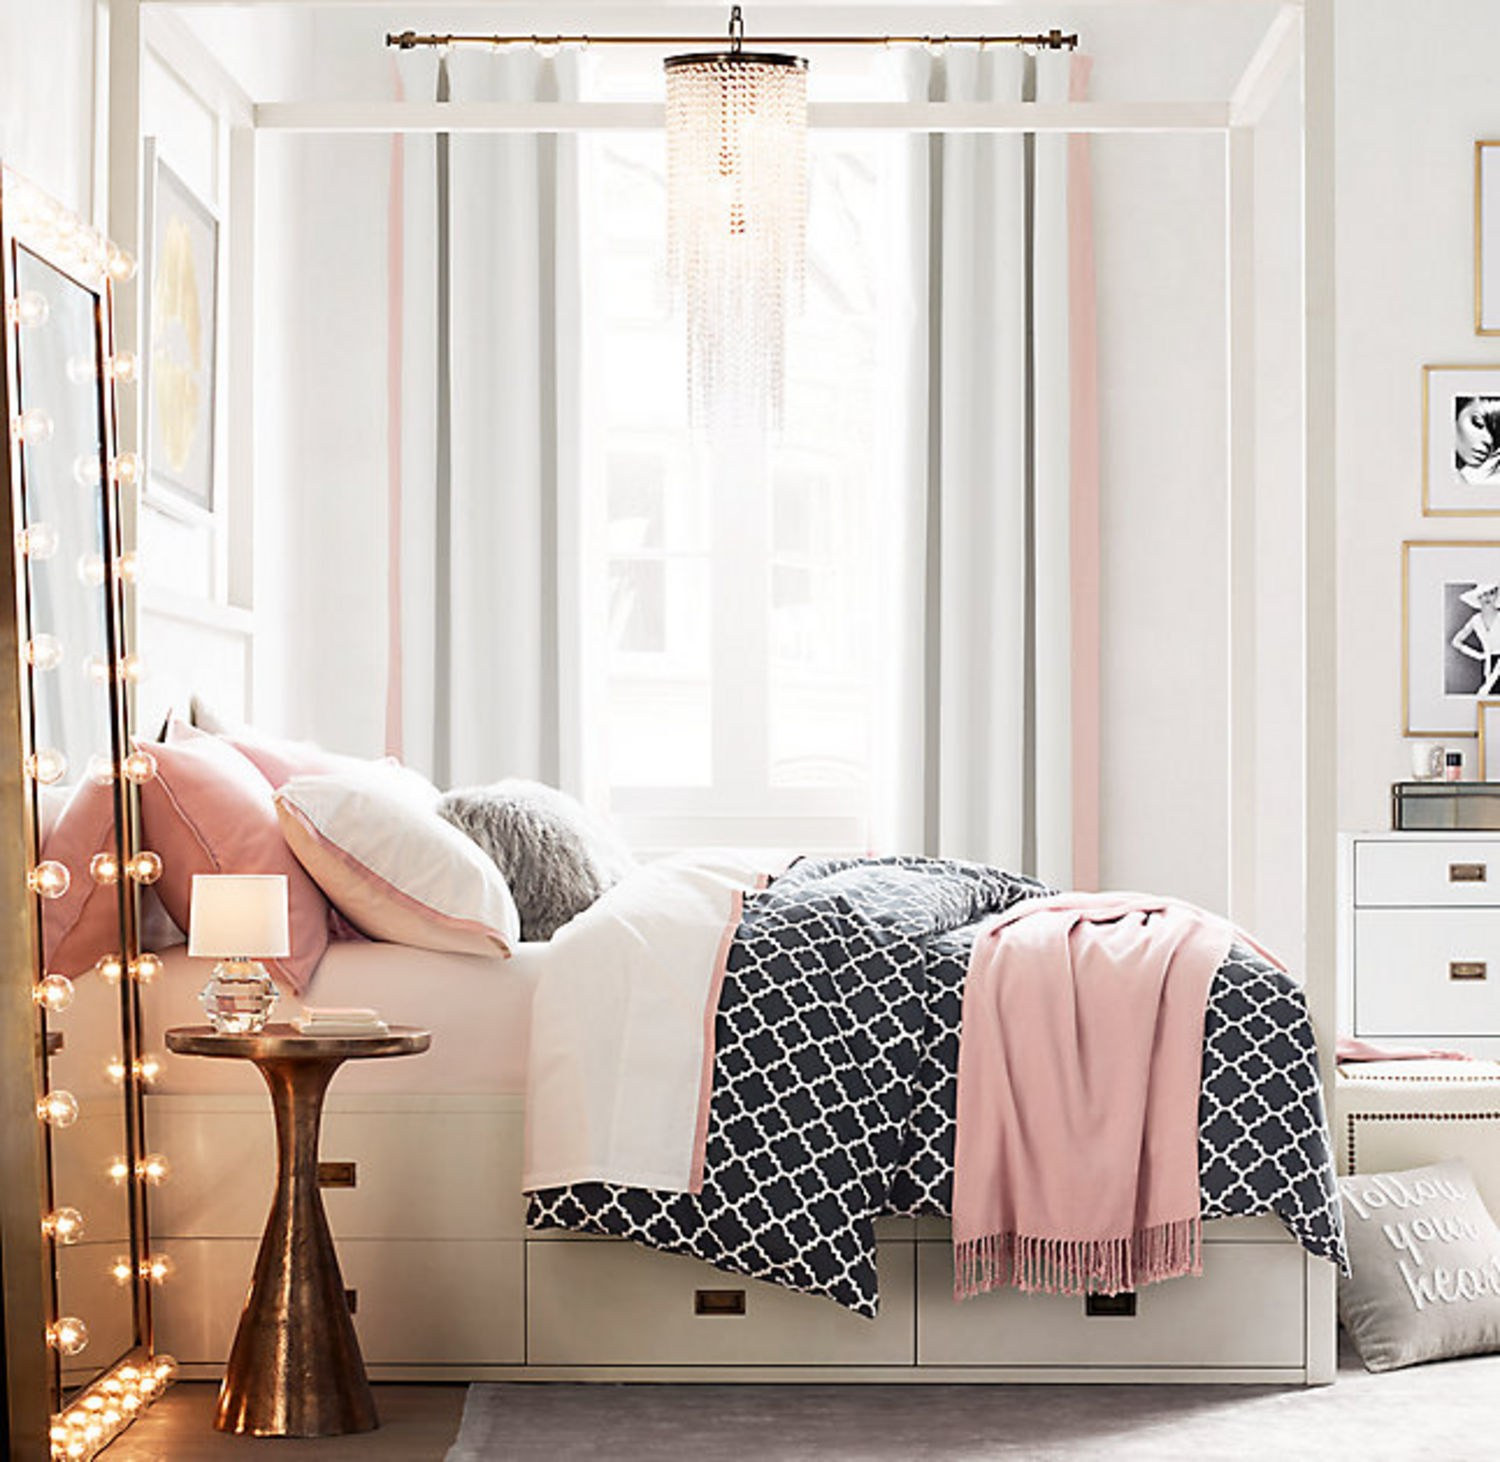 Small Teen Girl Bedroom
 13 Things Your Tiny Apartment Needs From Restoration